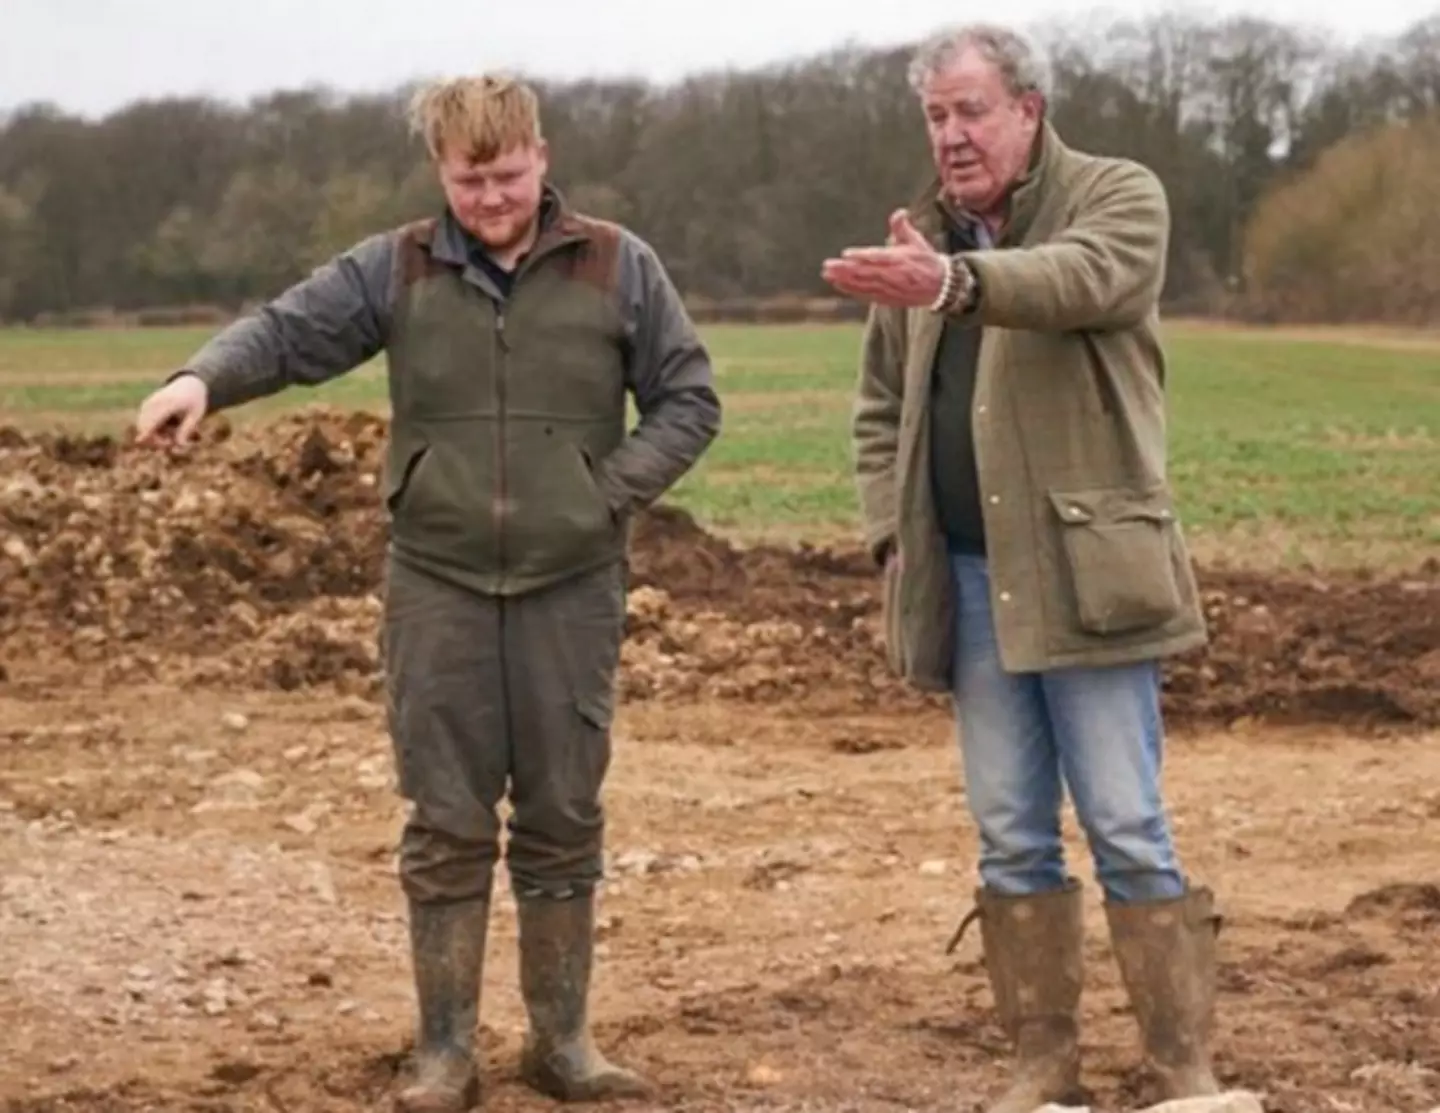 Clarkson's Farm has been a hit since it landed on Amazon.